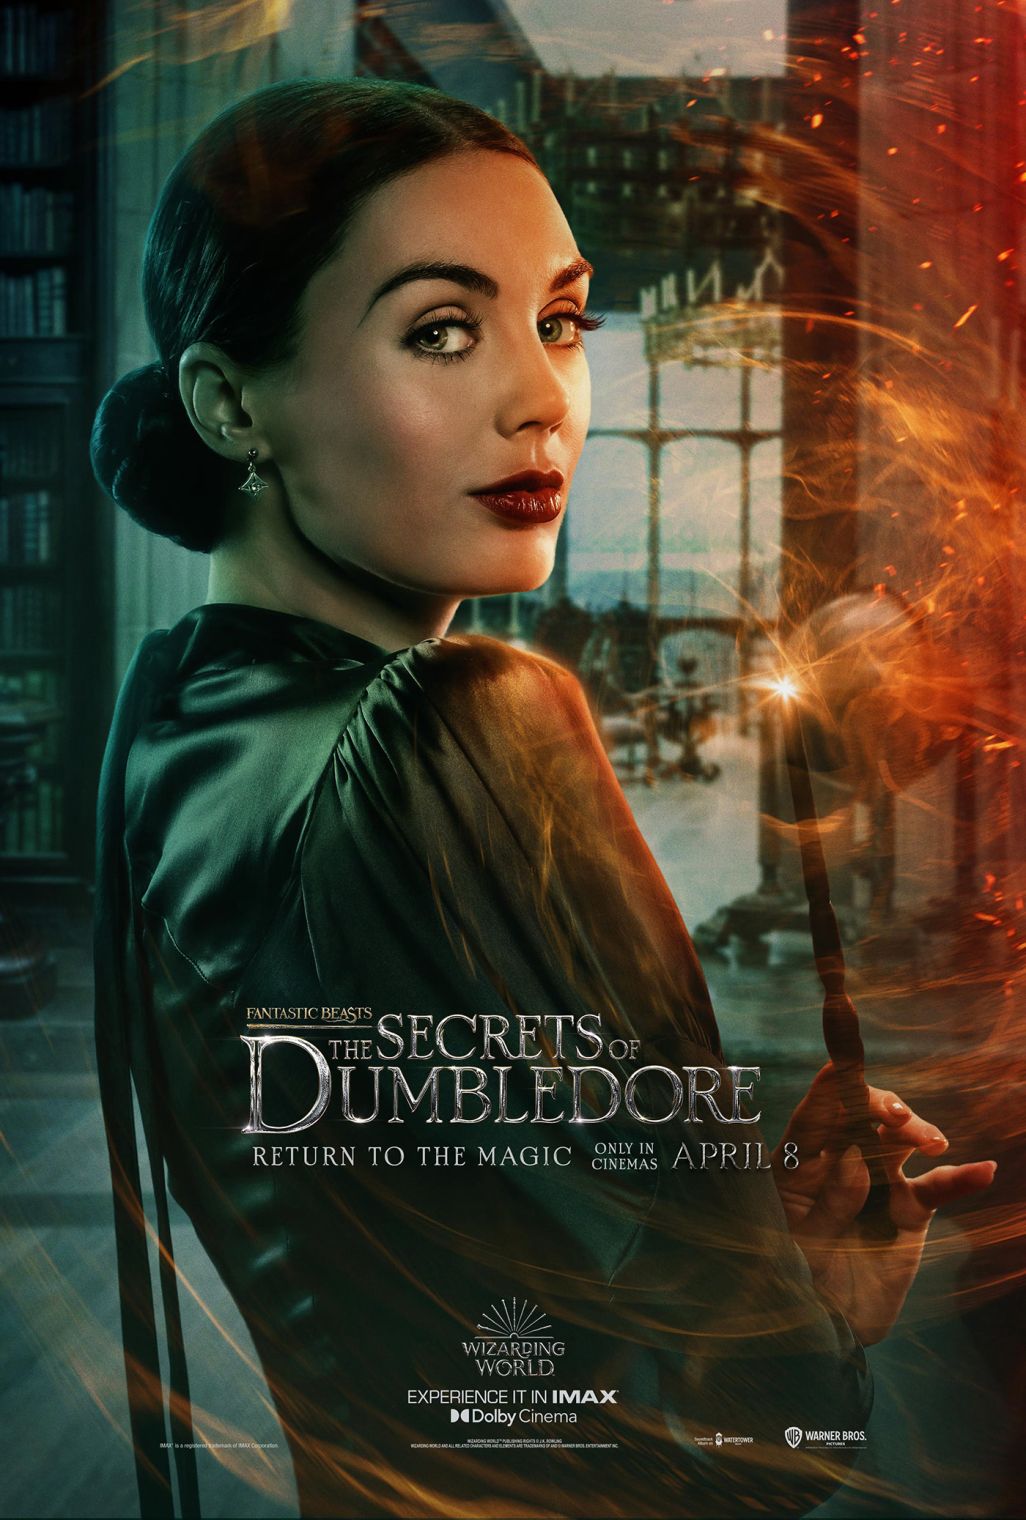 Fantastic Beasts: The Secrets of Dumbledore is released today starring Poppy Corby-Tuech